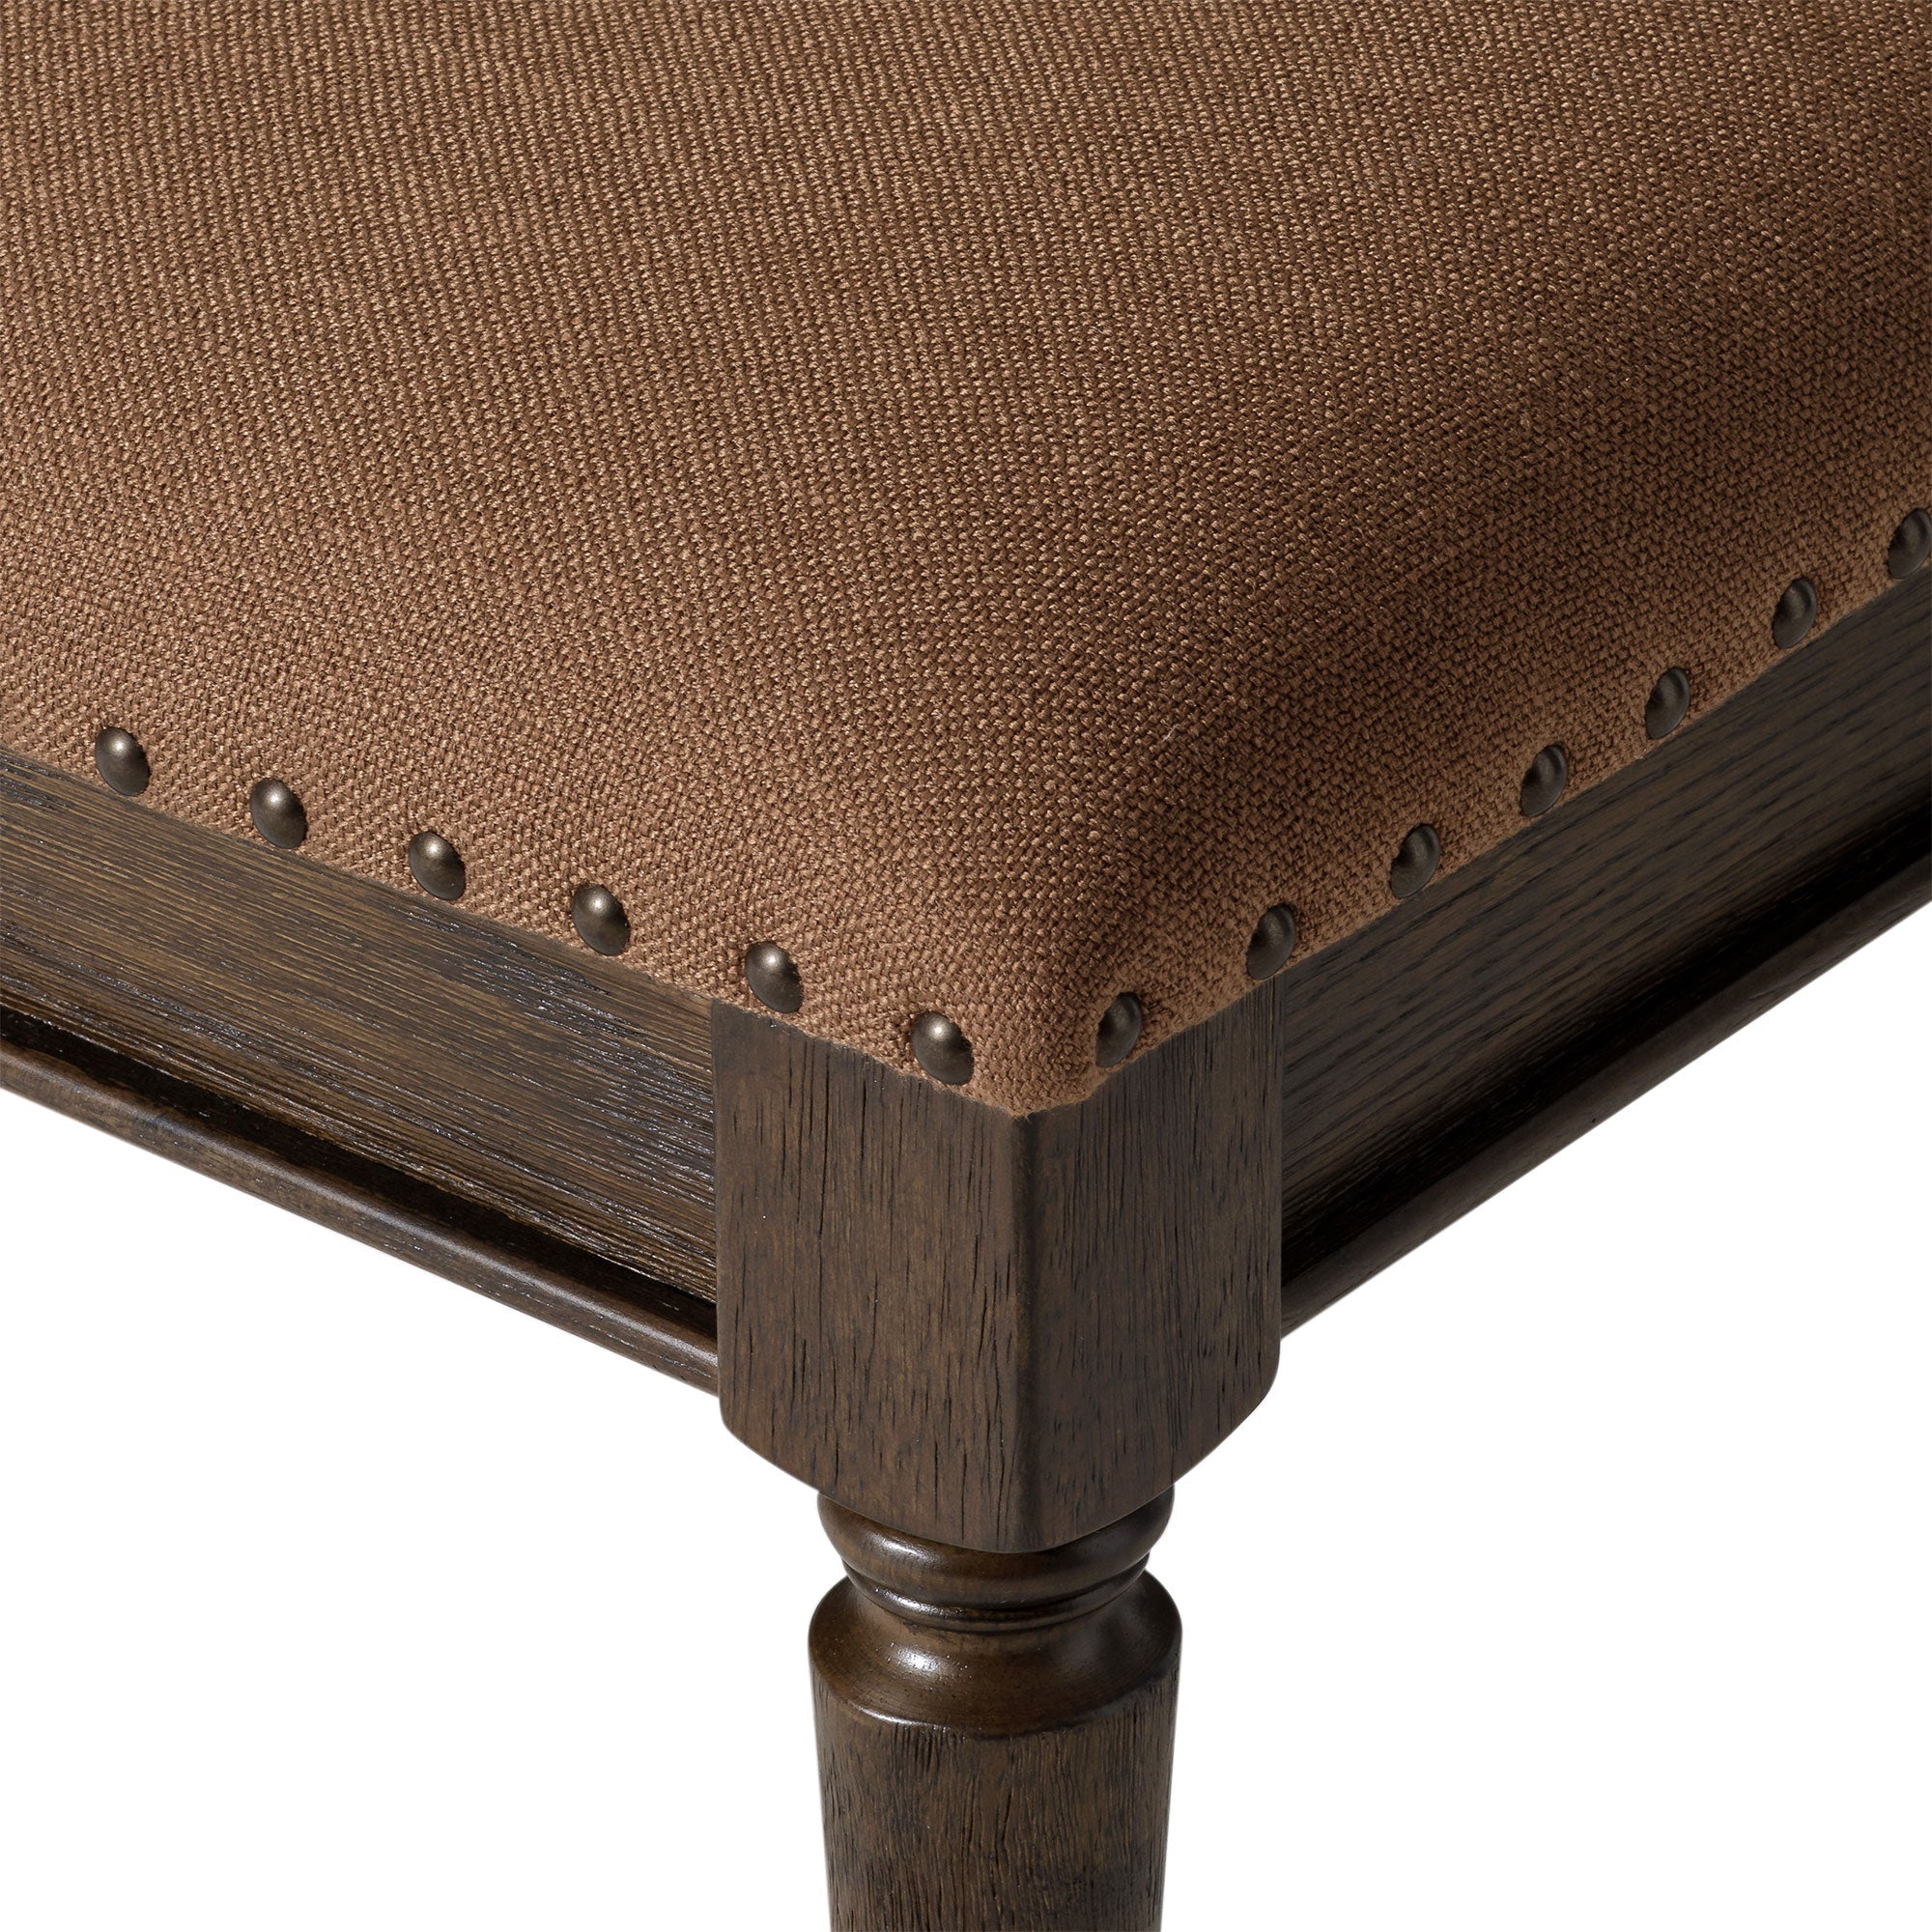 Elizabeth Classical Upholstered Wooden Bench in Antiqued Brown Finish in Ottomans & Benches by Maven Lane